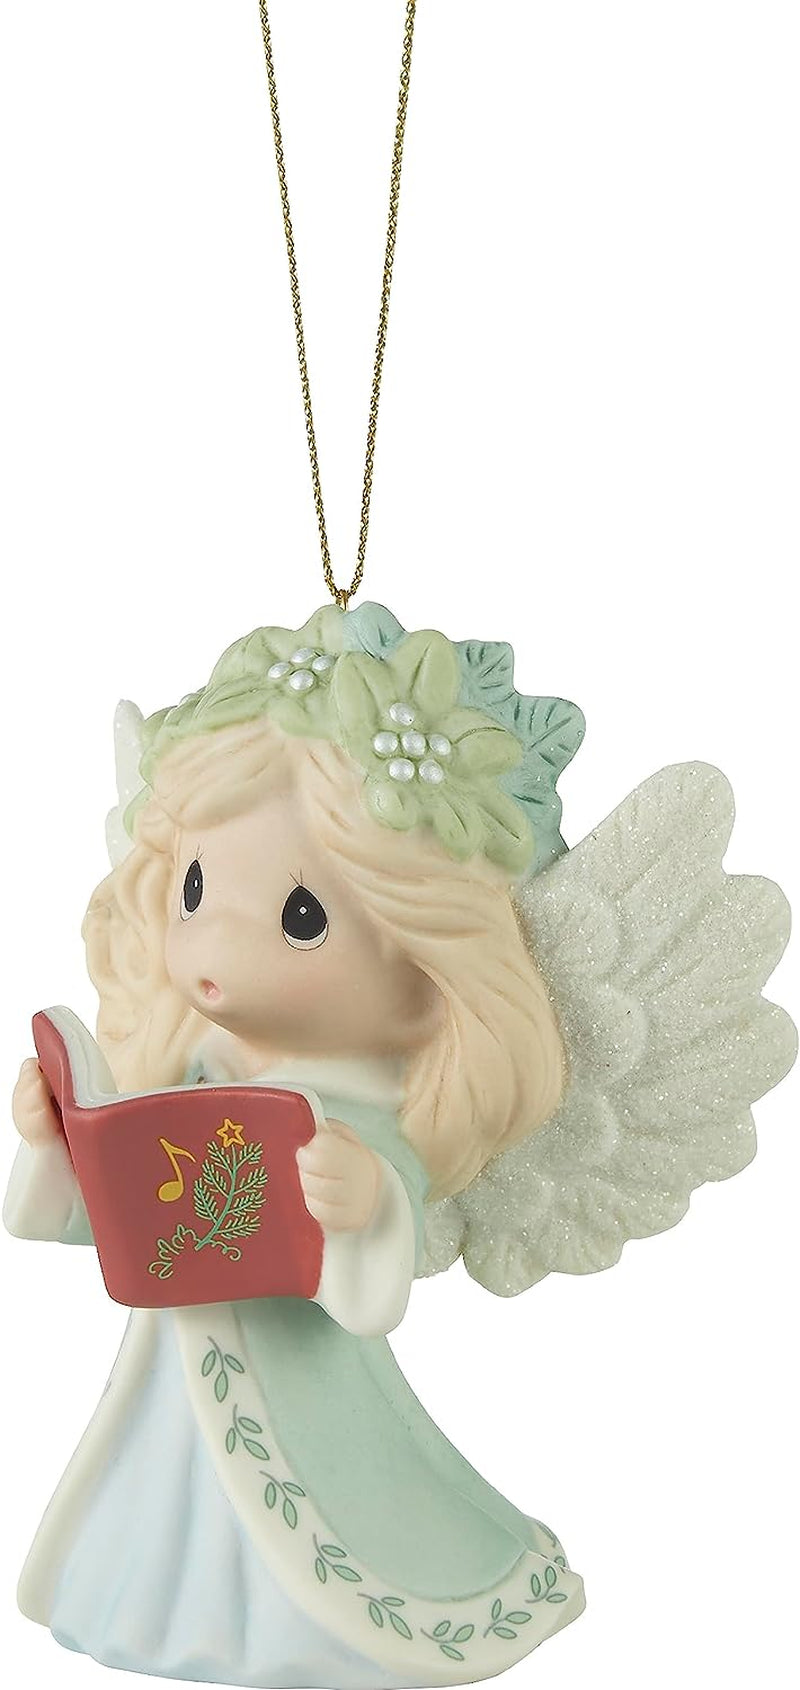 Precious Moments 231018 Wishing You Joyful Sounds of the Season Annual Angel Bisque Porcelain Ornament  Precious Moments   